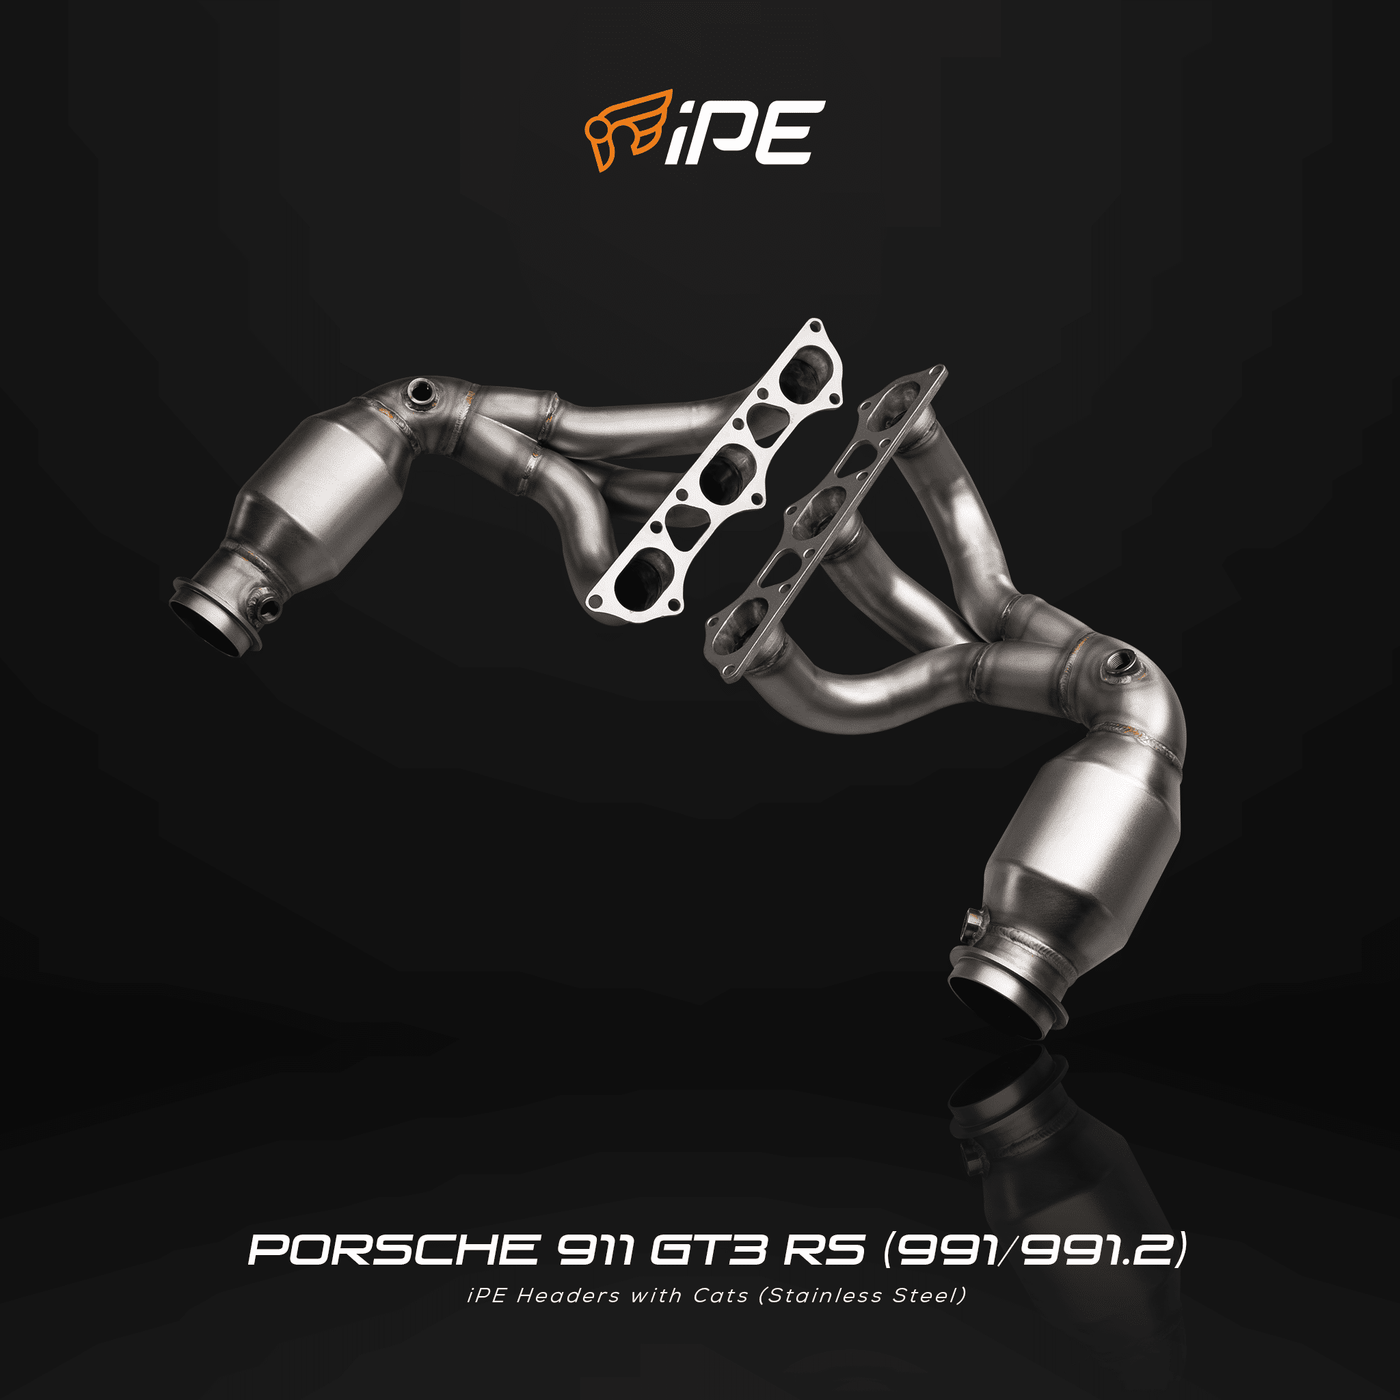 Porsche 911 GT3 / RS (991/991.2) Exhaust System - Headers with Cats - Stainless Steel